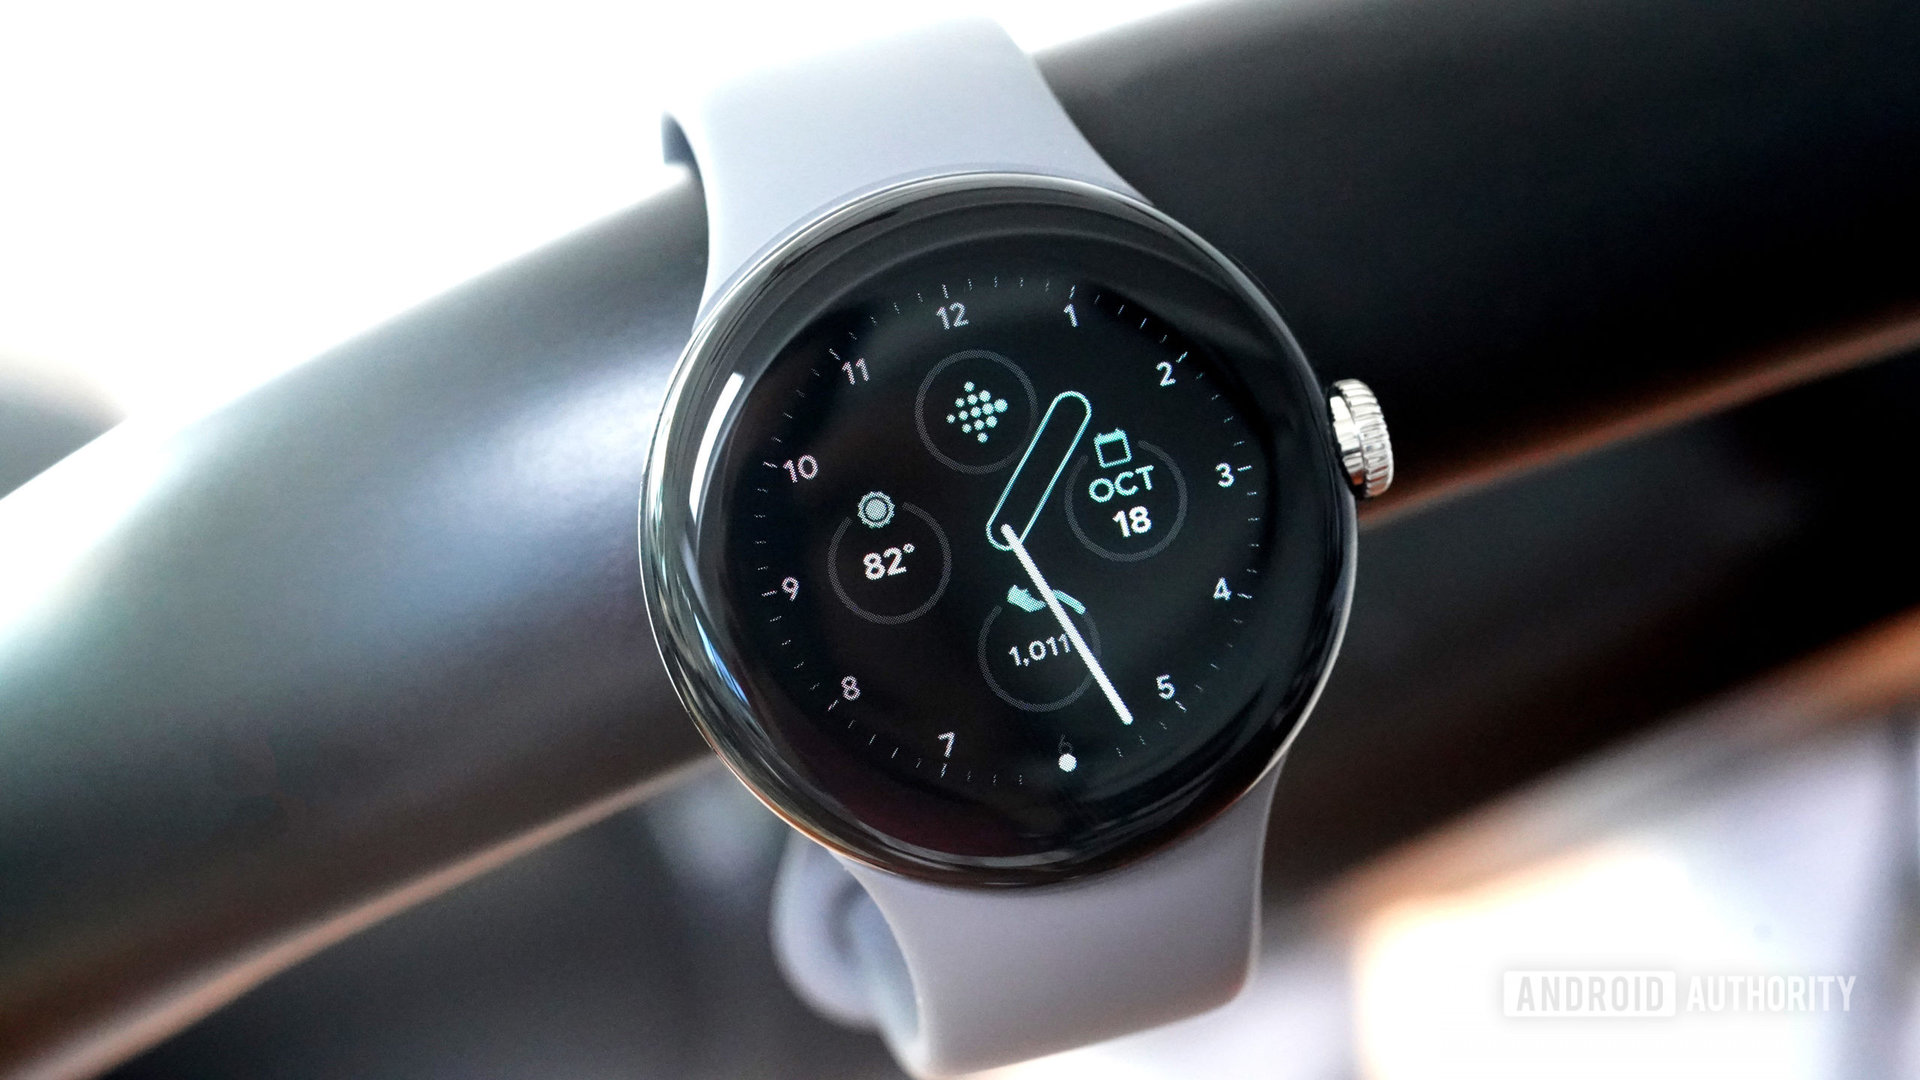 A stationary bike with a classic clock face hangs a Google Pixel Watch.